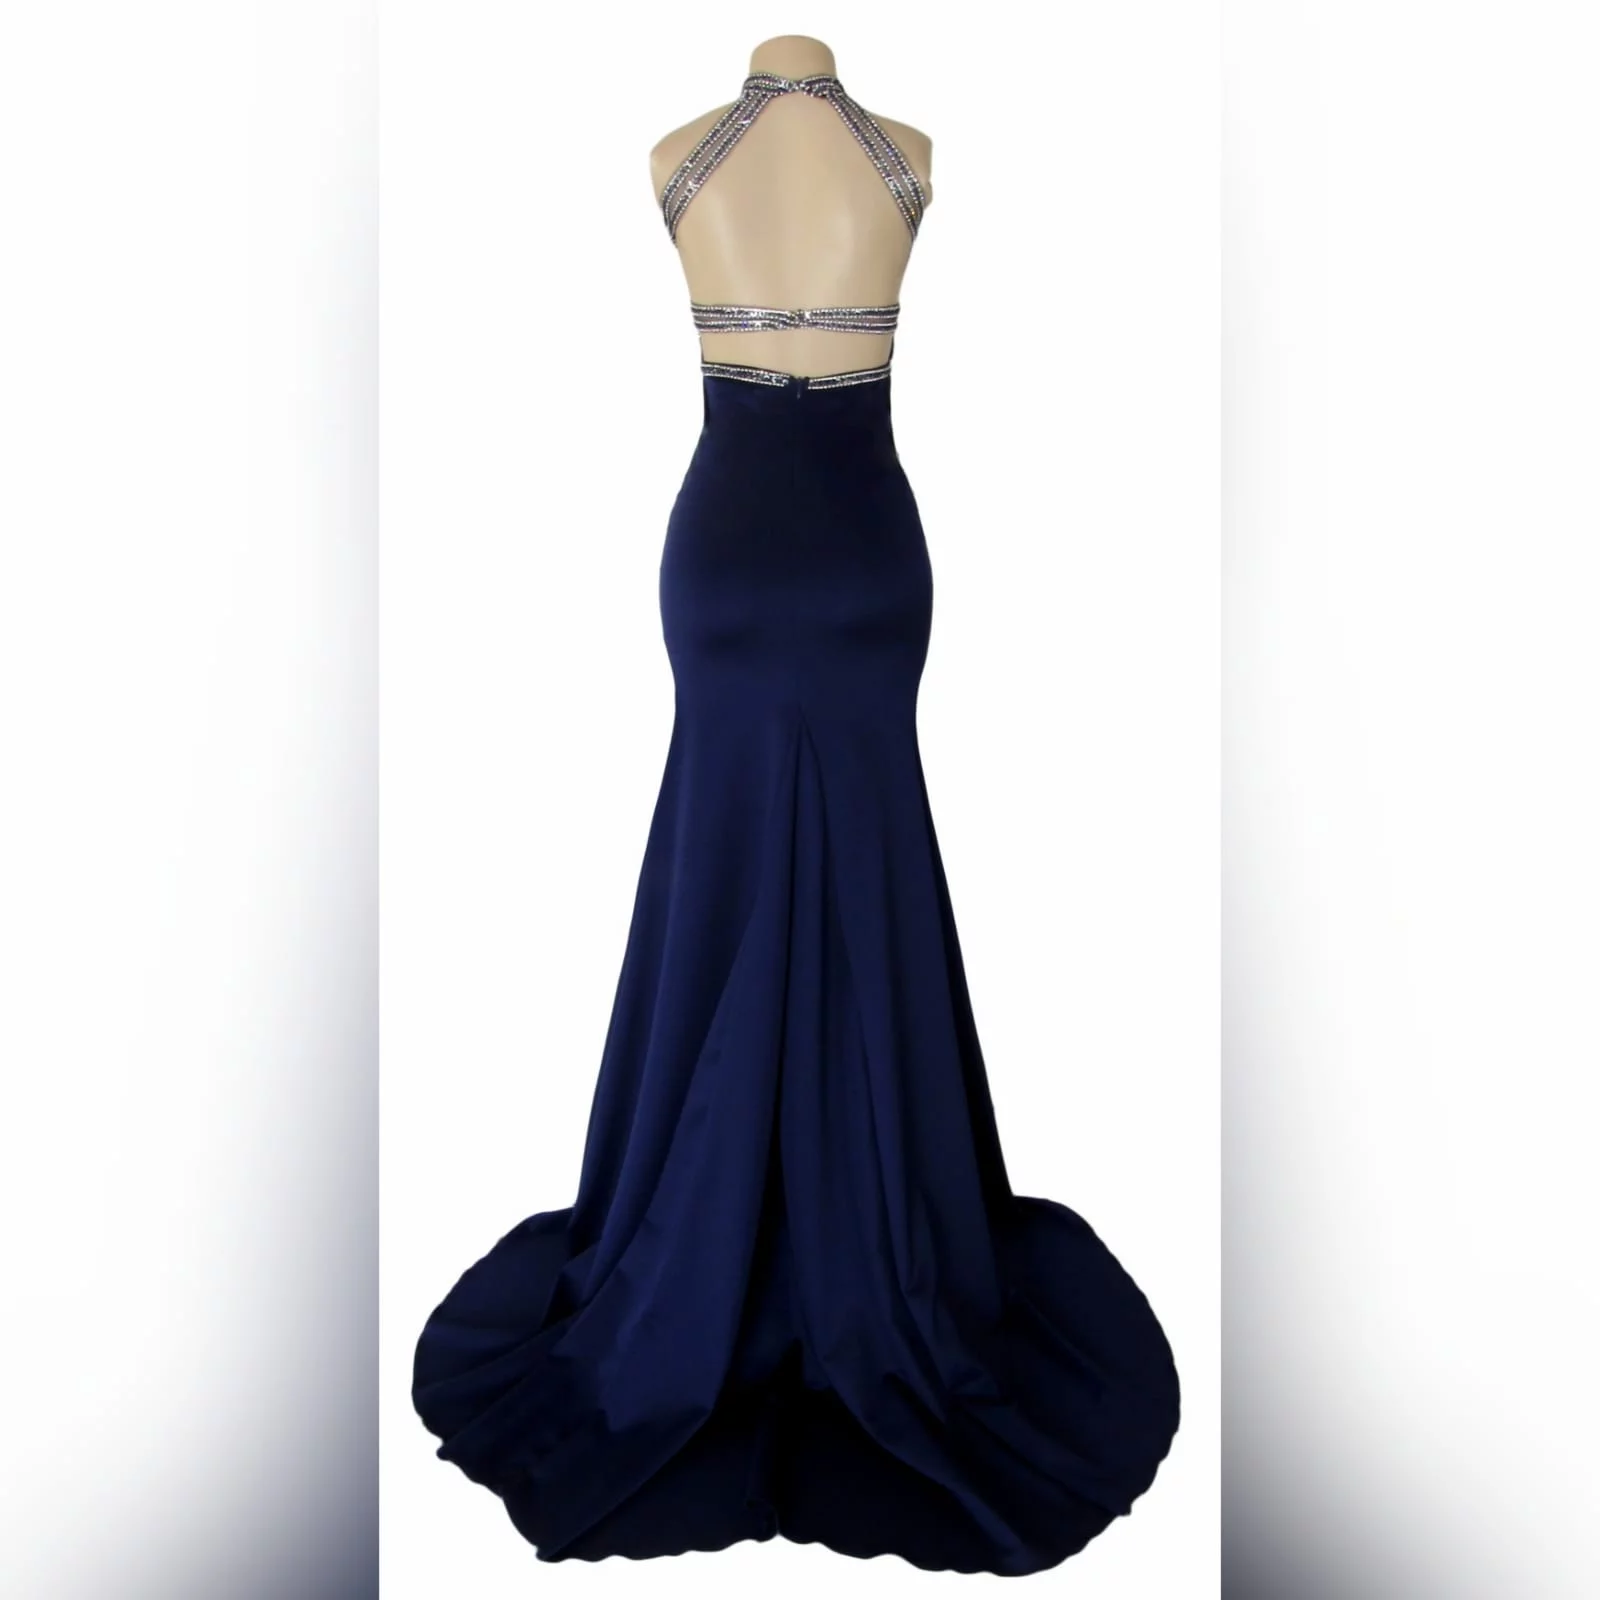 Navy blue silver beaded prom dress 2 navy blue silver beaded prom dress with an illusion neckline and a choker effect. Backless design detailed with beaded straps. Fitted bottom with a slit and a train.